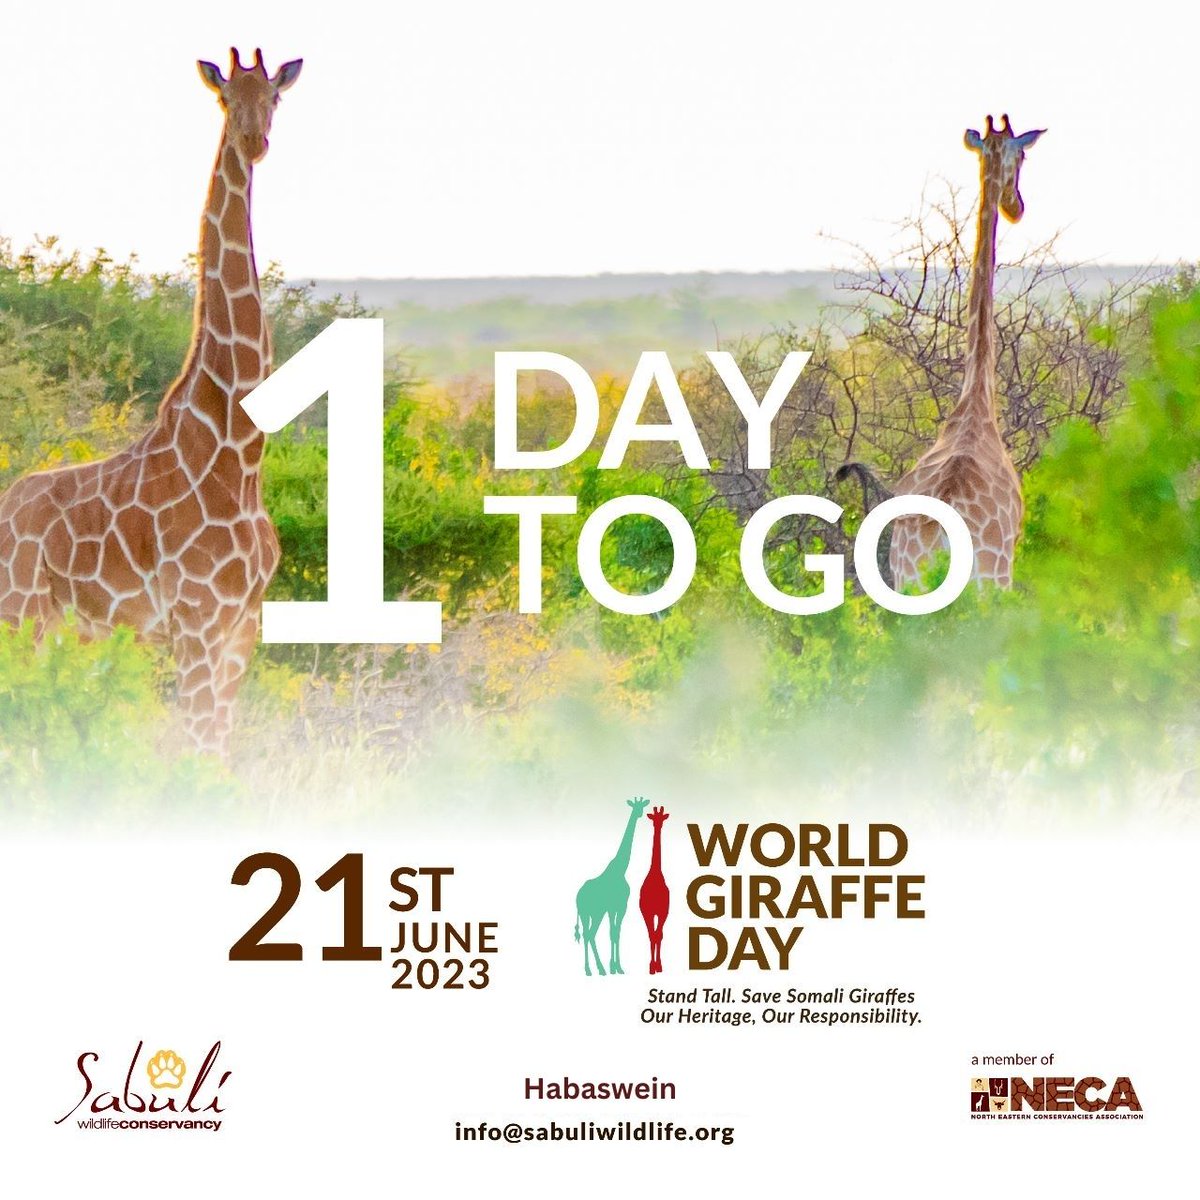 Just as a giraffe's spots are unique, so is our shared responsibility to protect them. 🦒🌿 Tomorrow, we celebrate #WorldGiraffeDay at Habaswein. Join us, let's paint a brighter future for these gentle giants!
#SabuliWildlifeConservancy #OneDayToGo